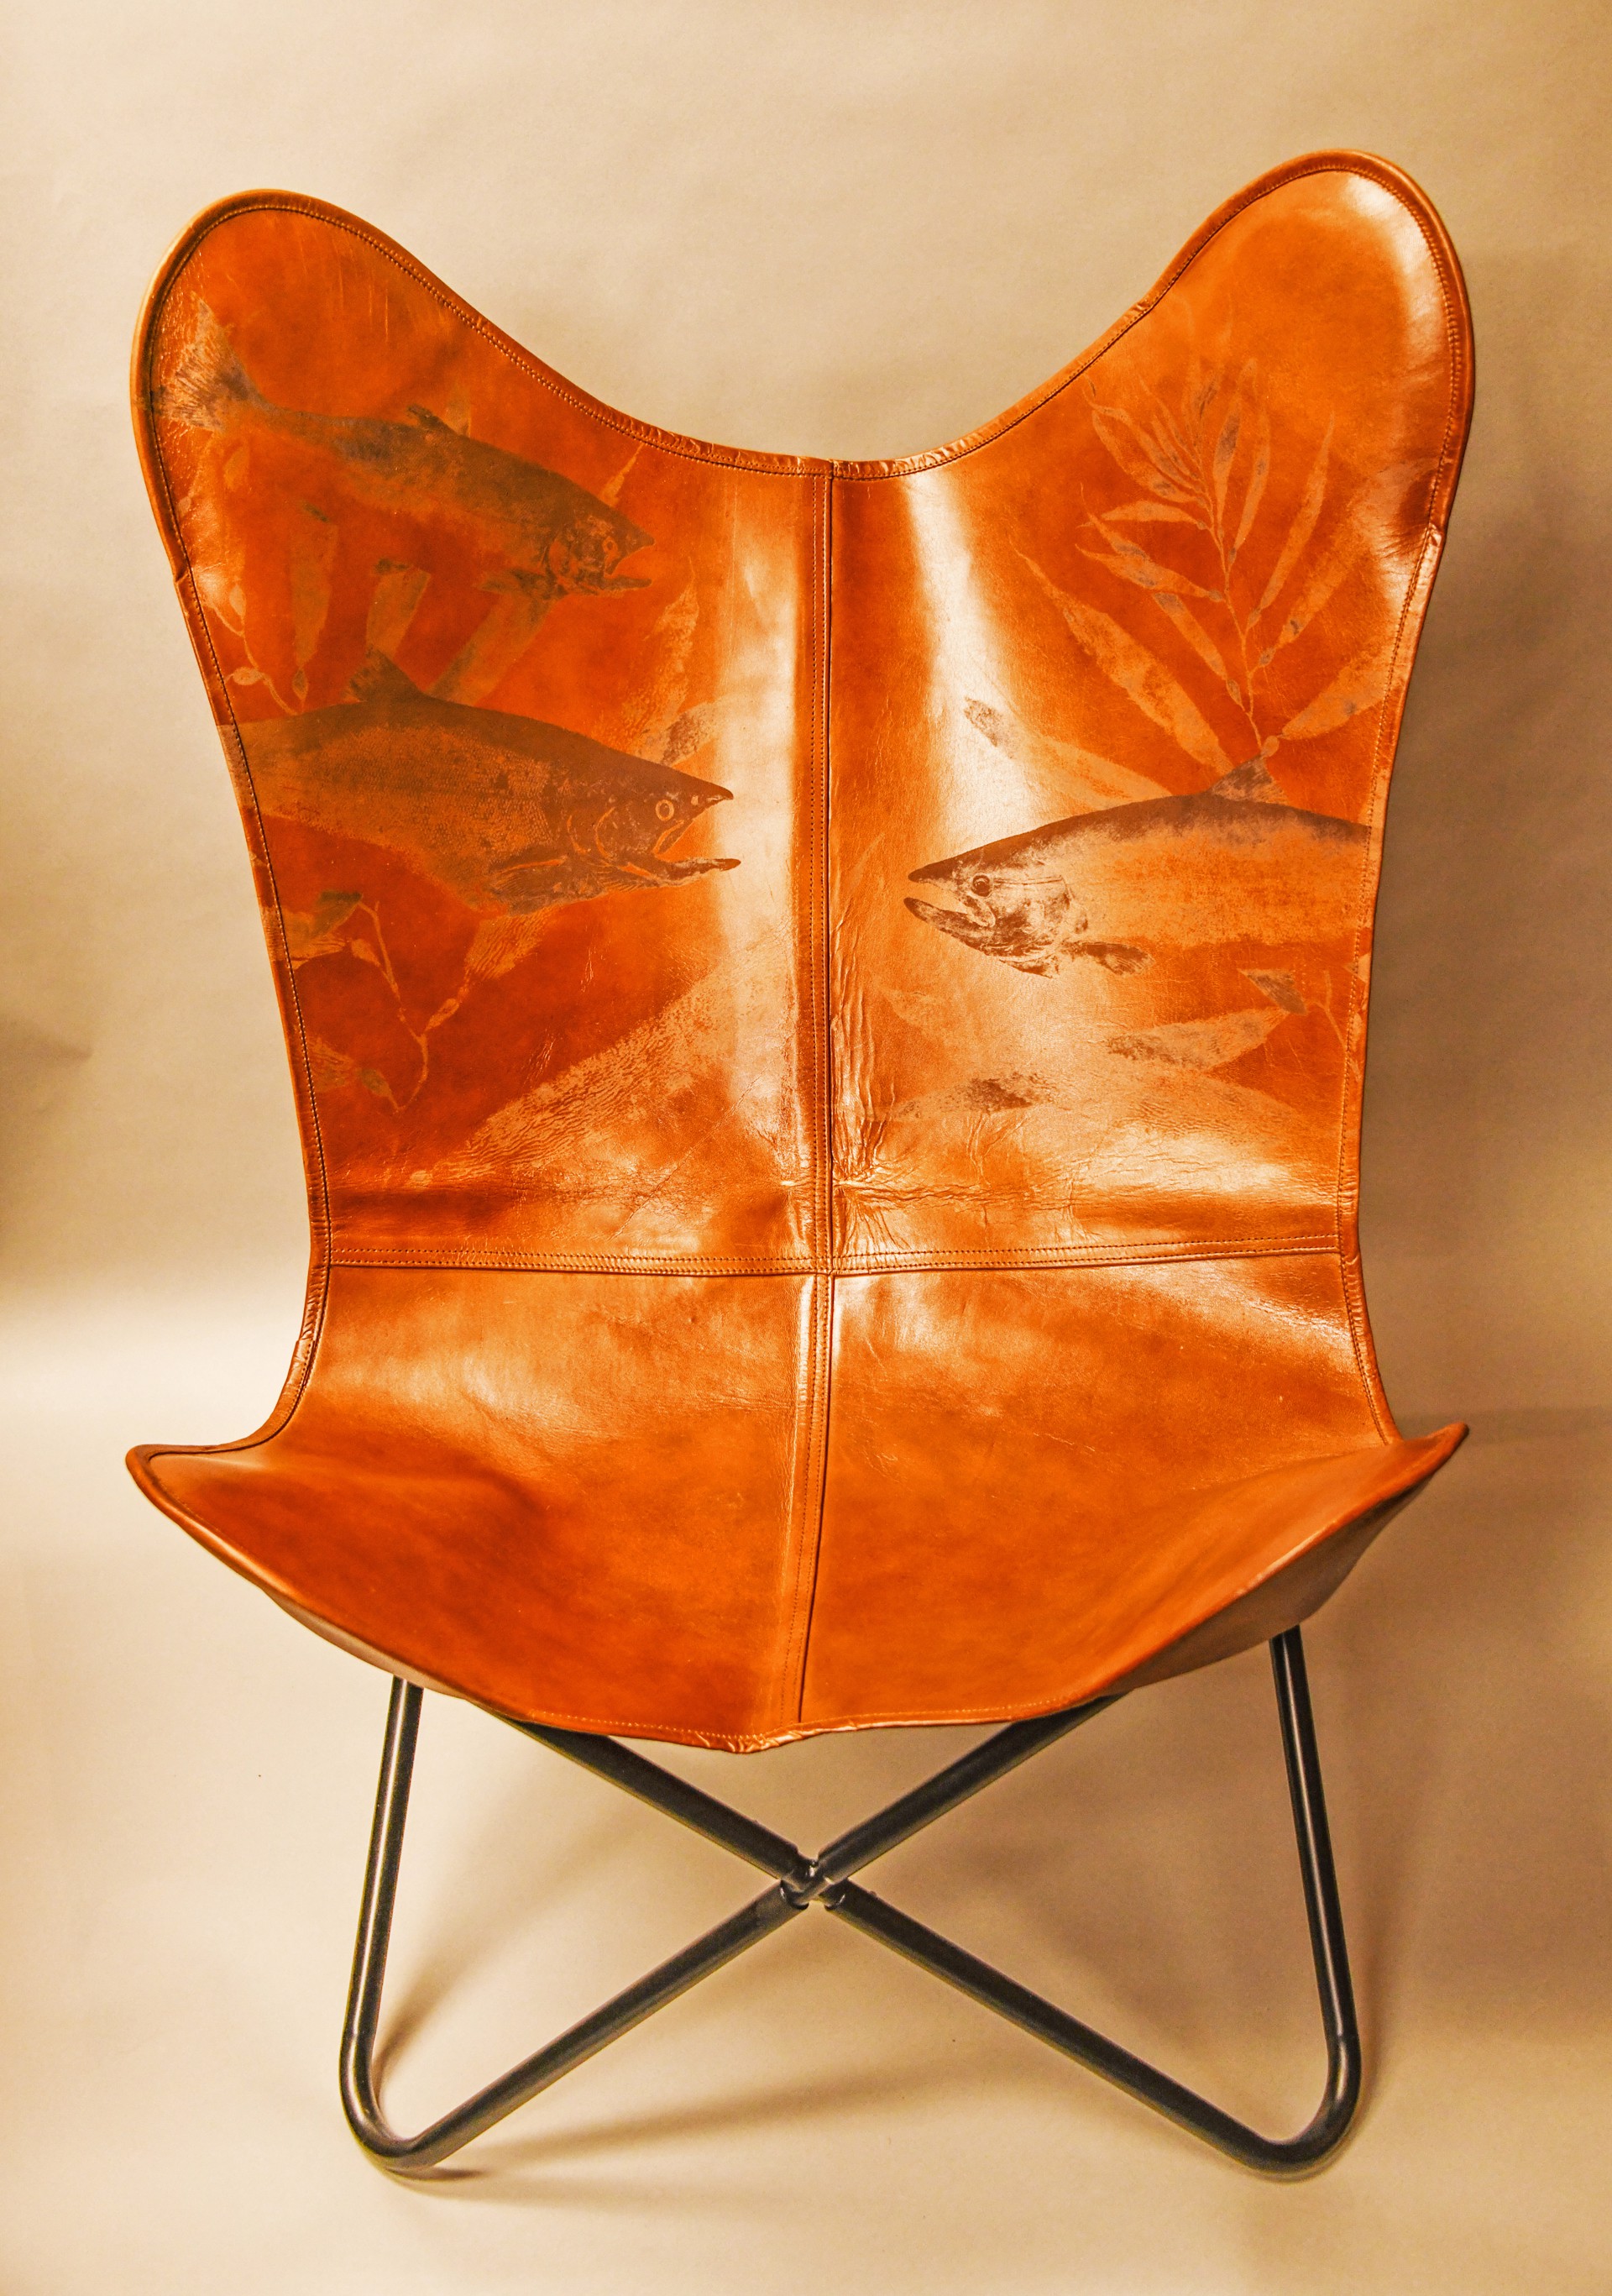 Three Species of Salmon in a Kelp Forest Leather Butterfly Chair by Duncan Berry